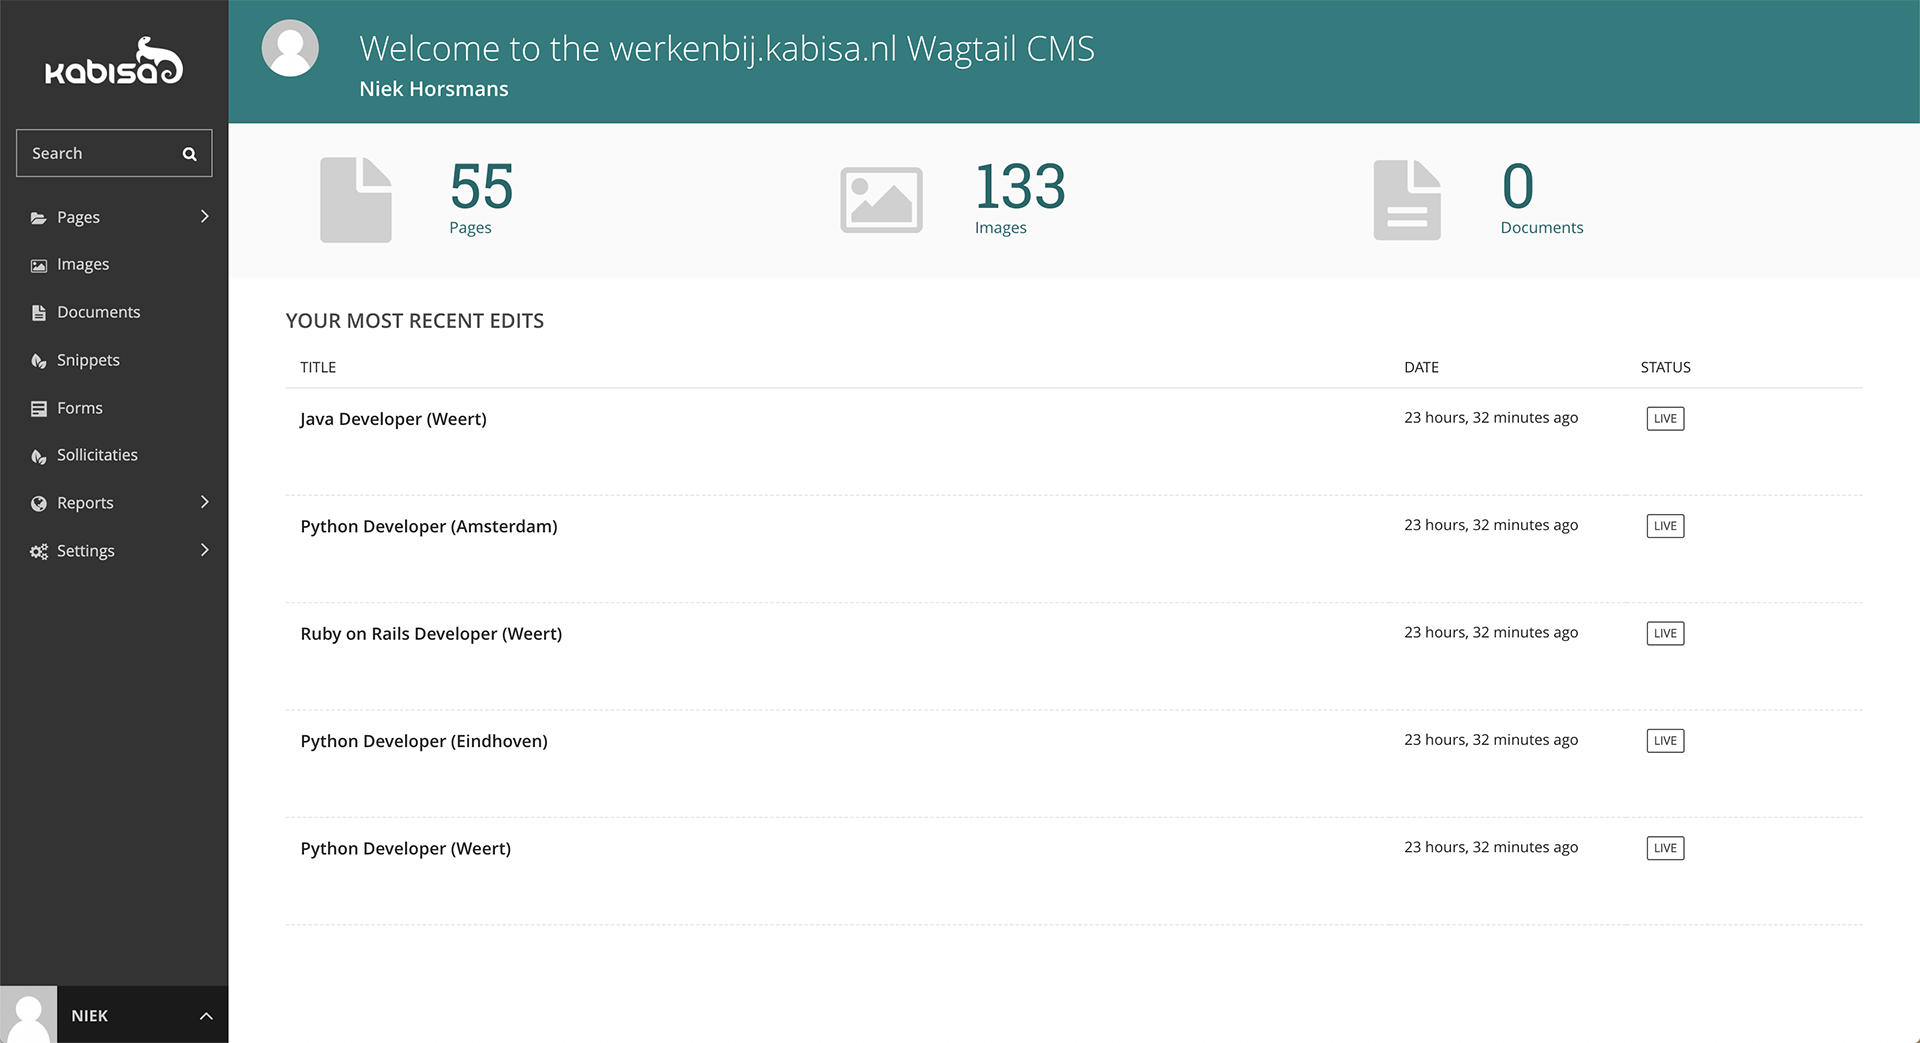 Wagtail CMS overview